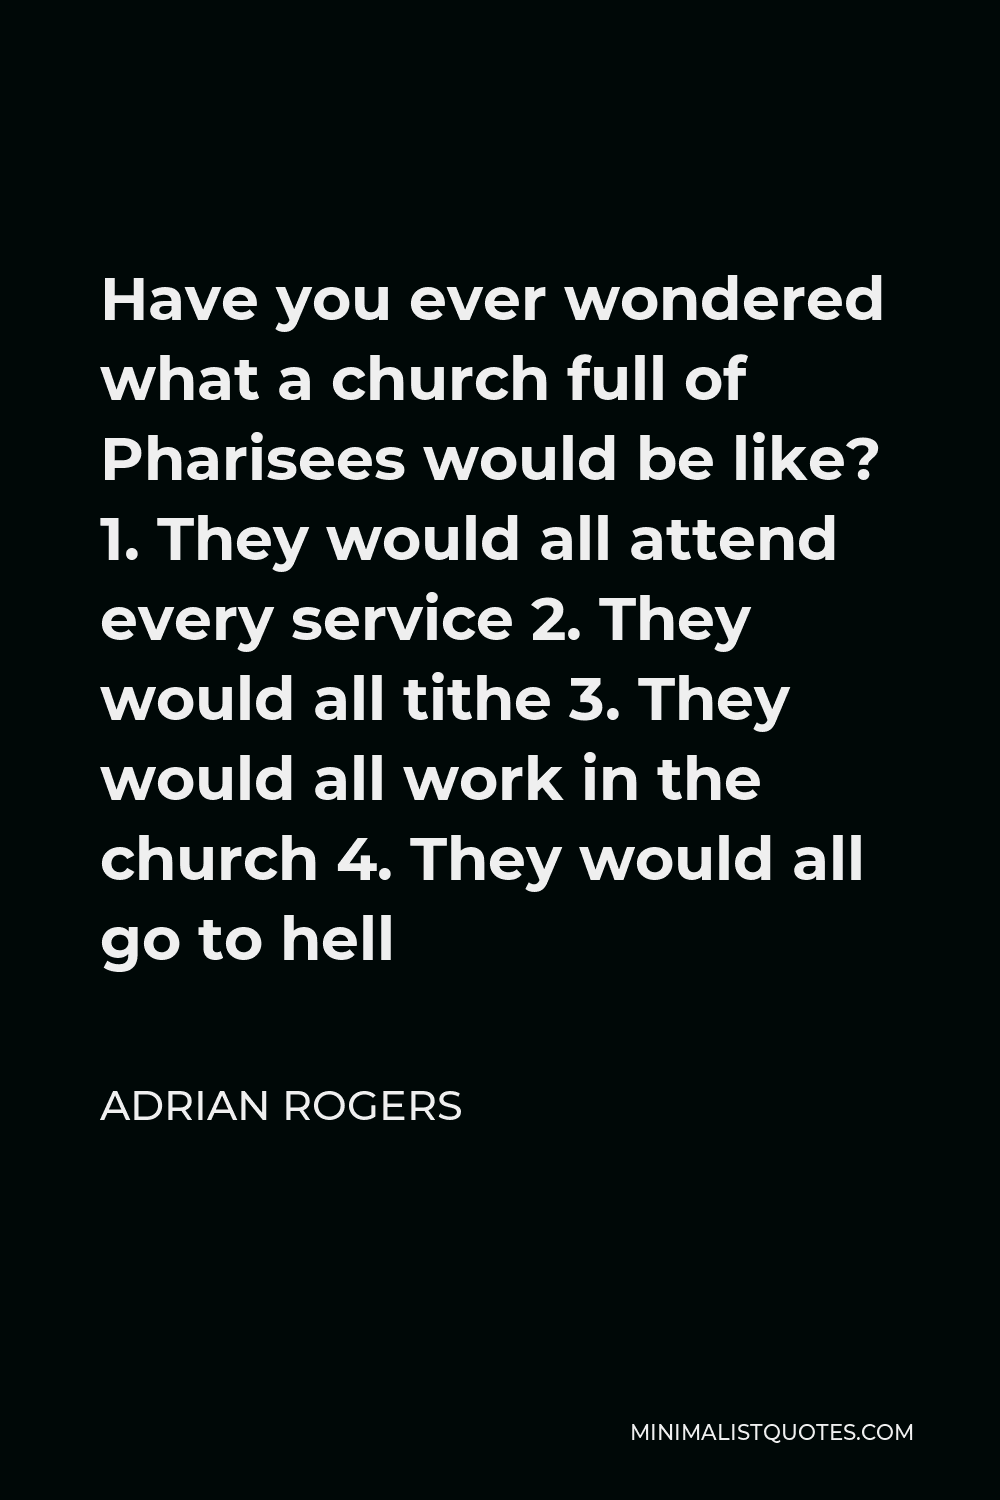 Adrian Rogers Quote - Have you ever wondered what a church full of Pharisees would be like? 1. They would all attend every service 2. They would all tithe 3. They would all work in the church 4. They would all go to hell